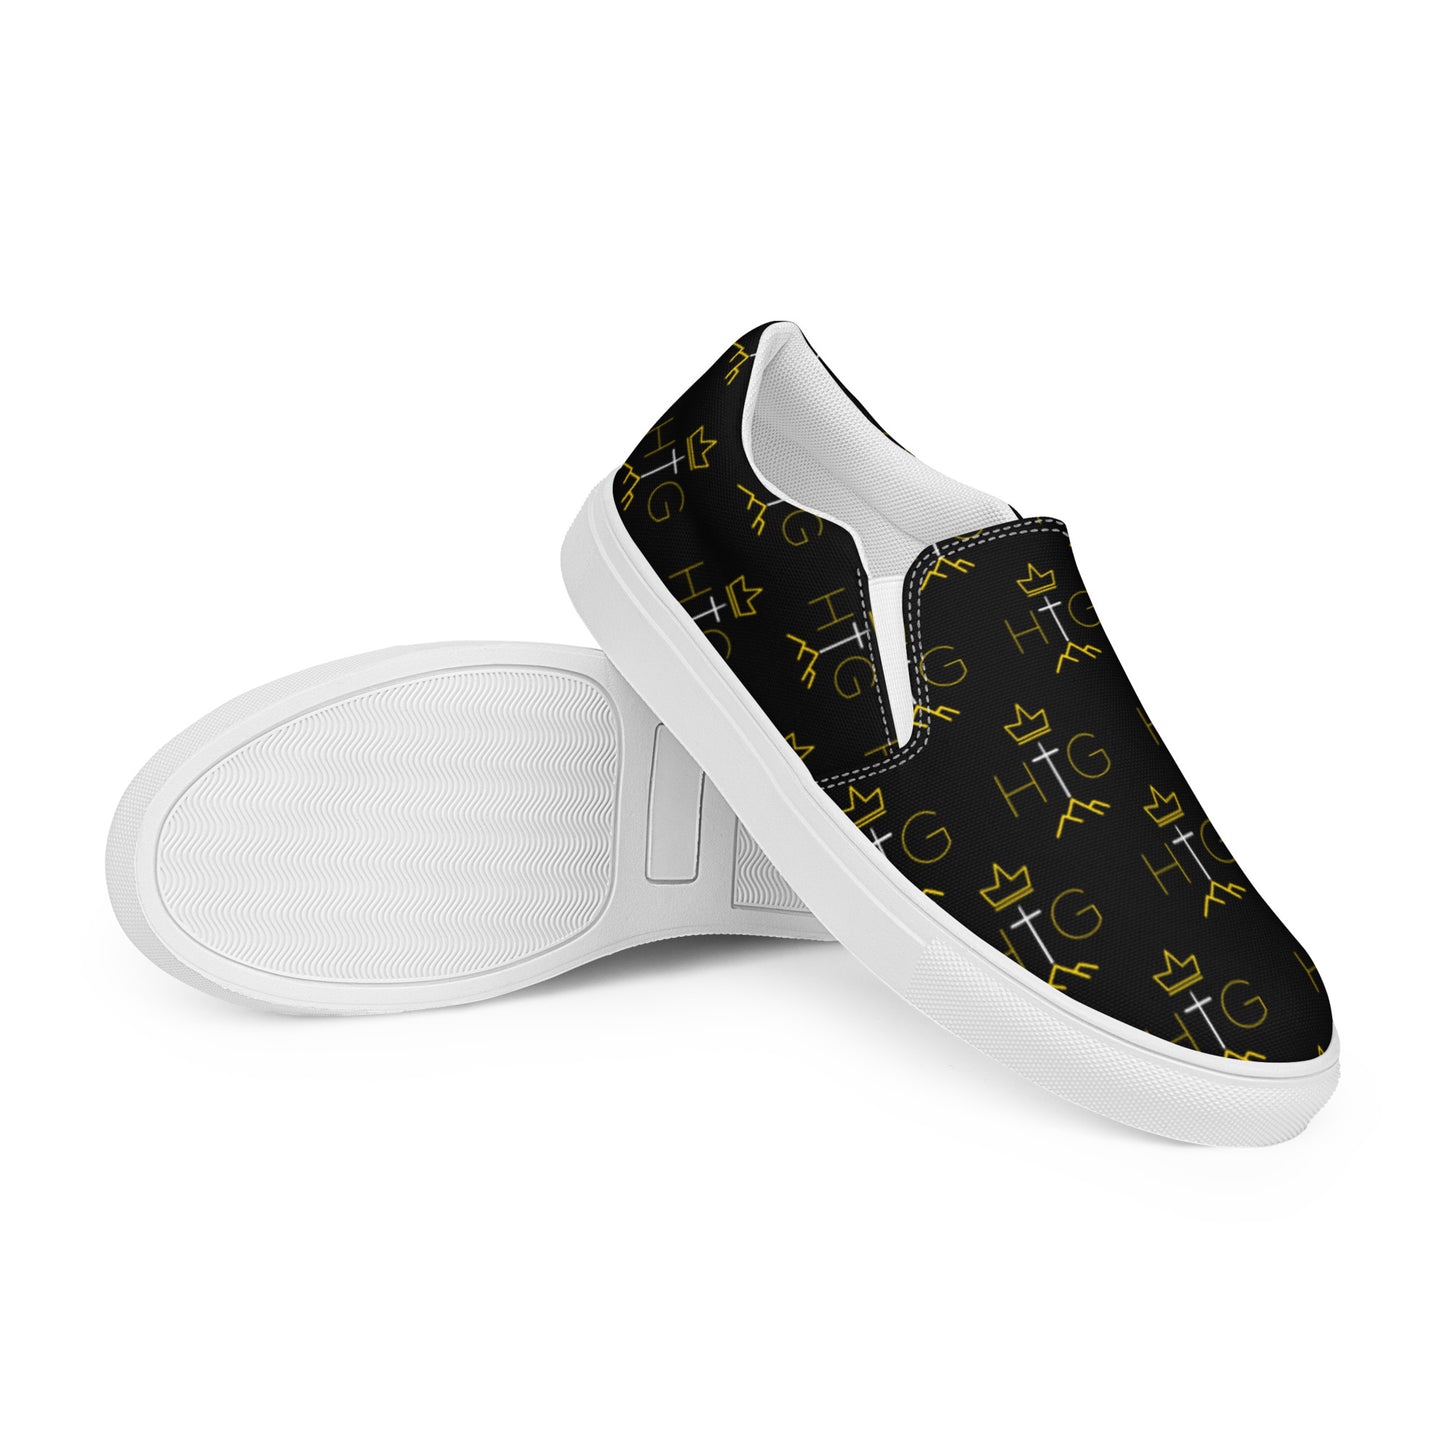 His Glory - Logo - Women’s slip-on canvas shoes